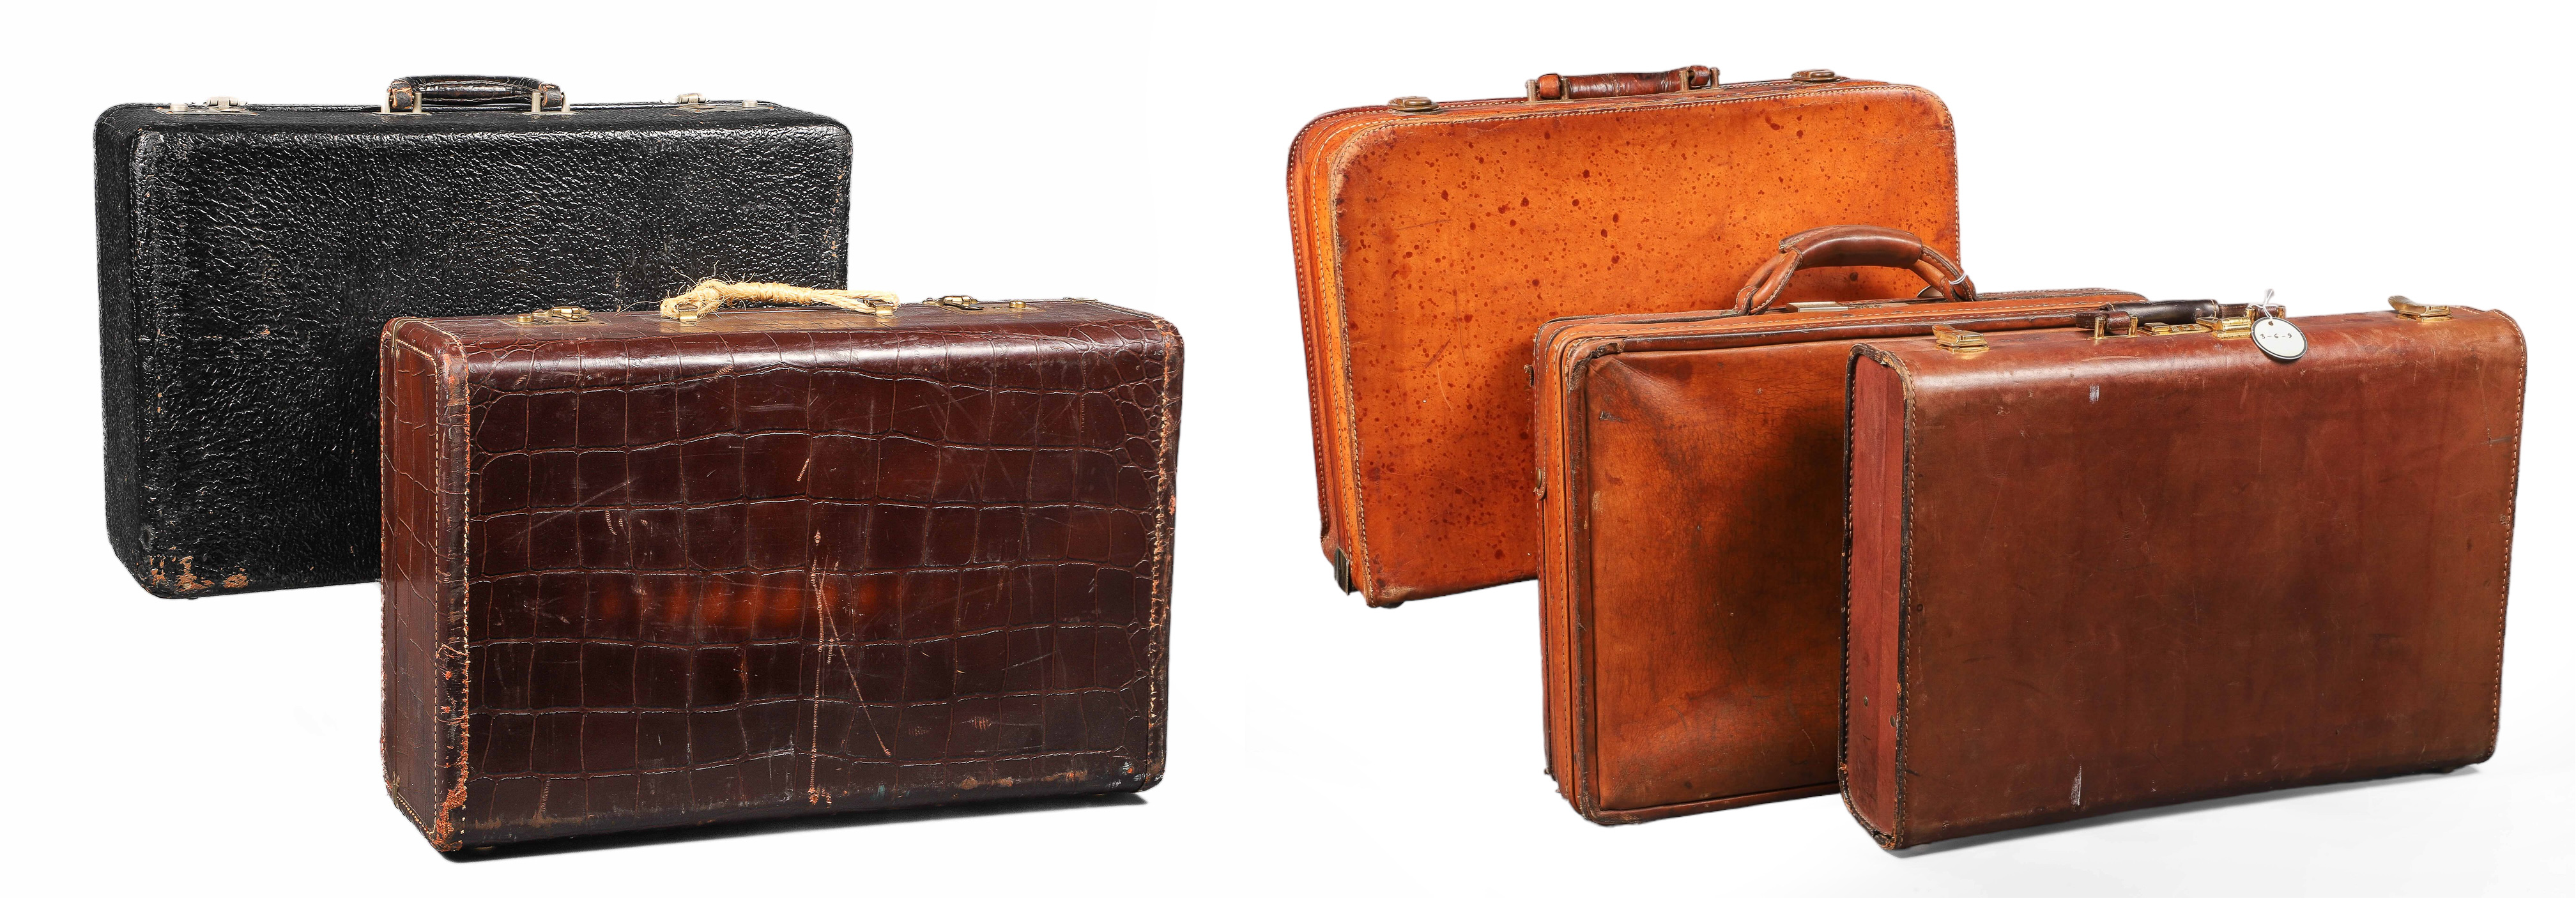  5 Leather attache and suitcases 318d61